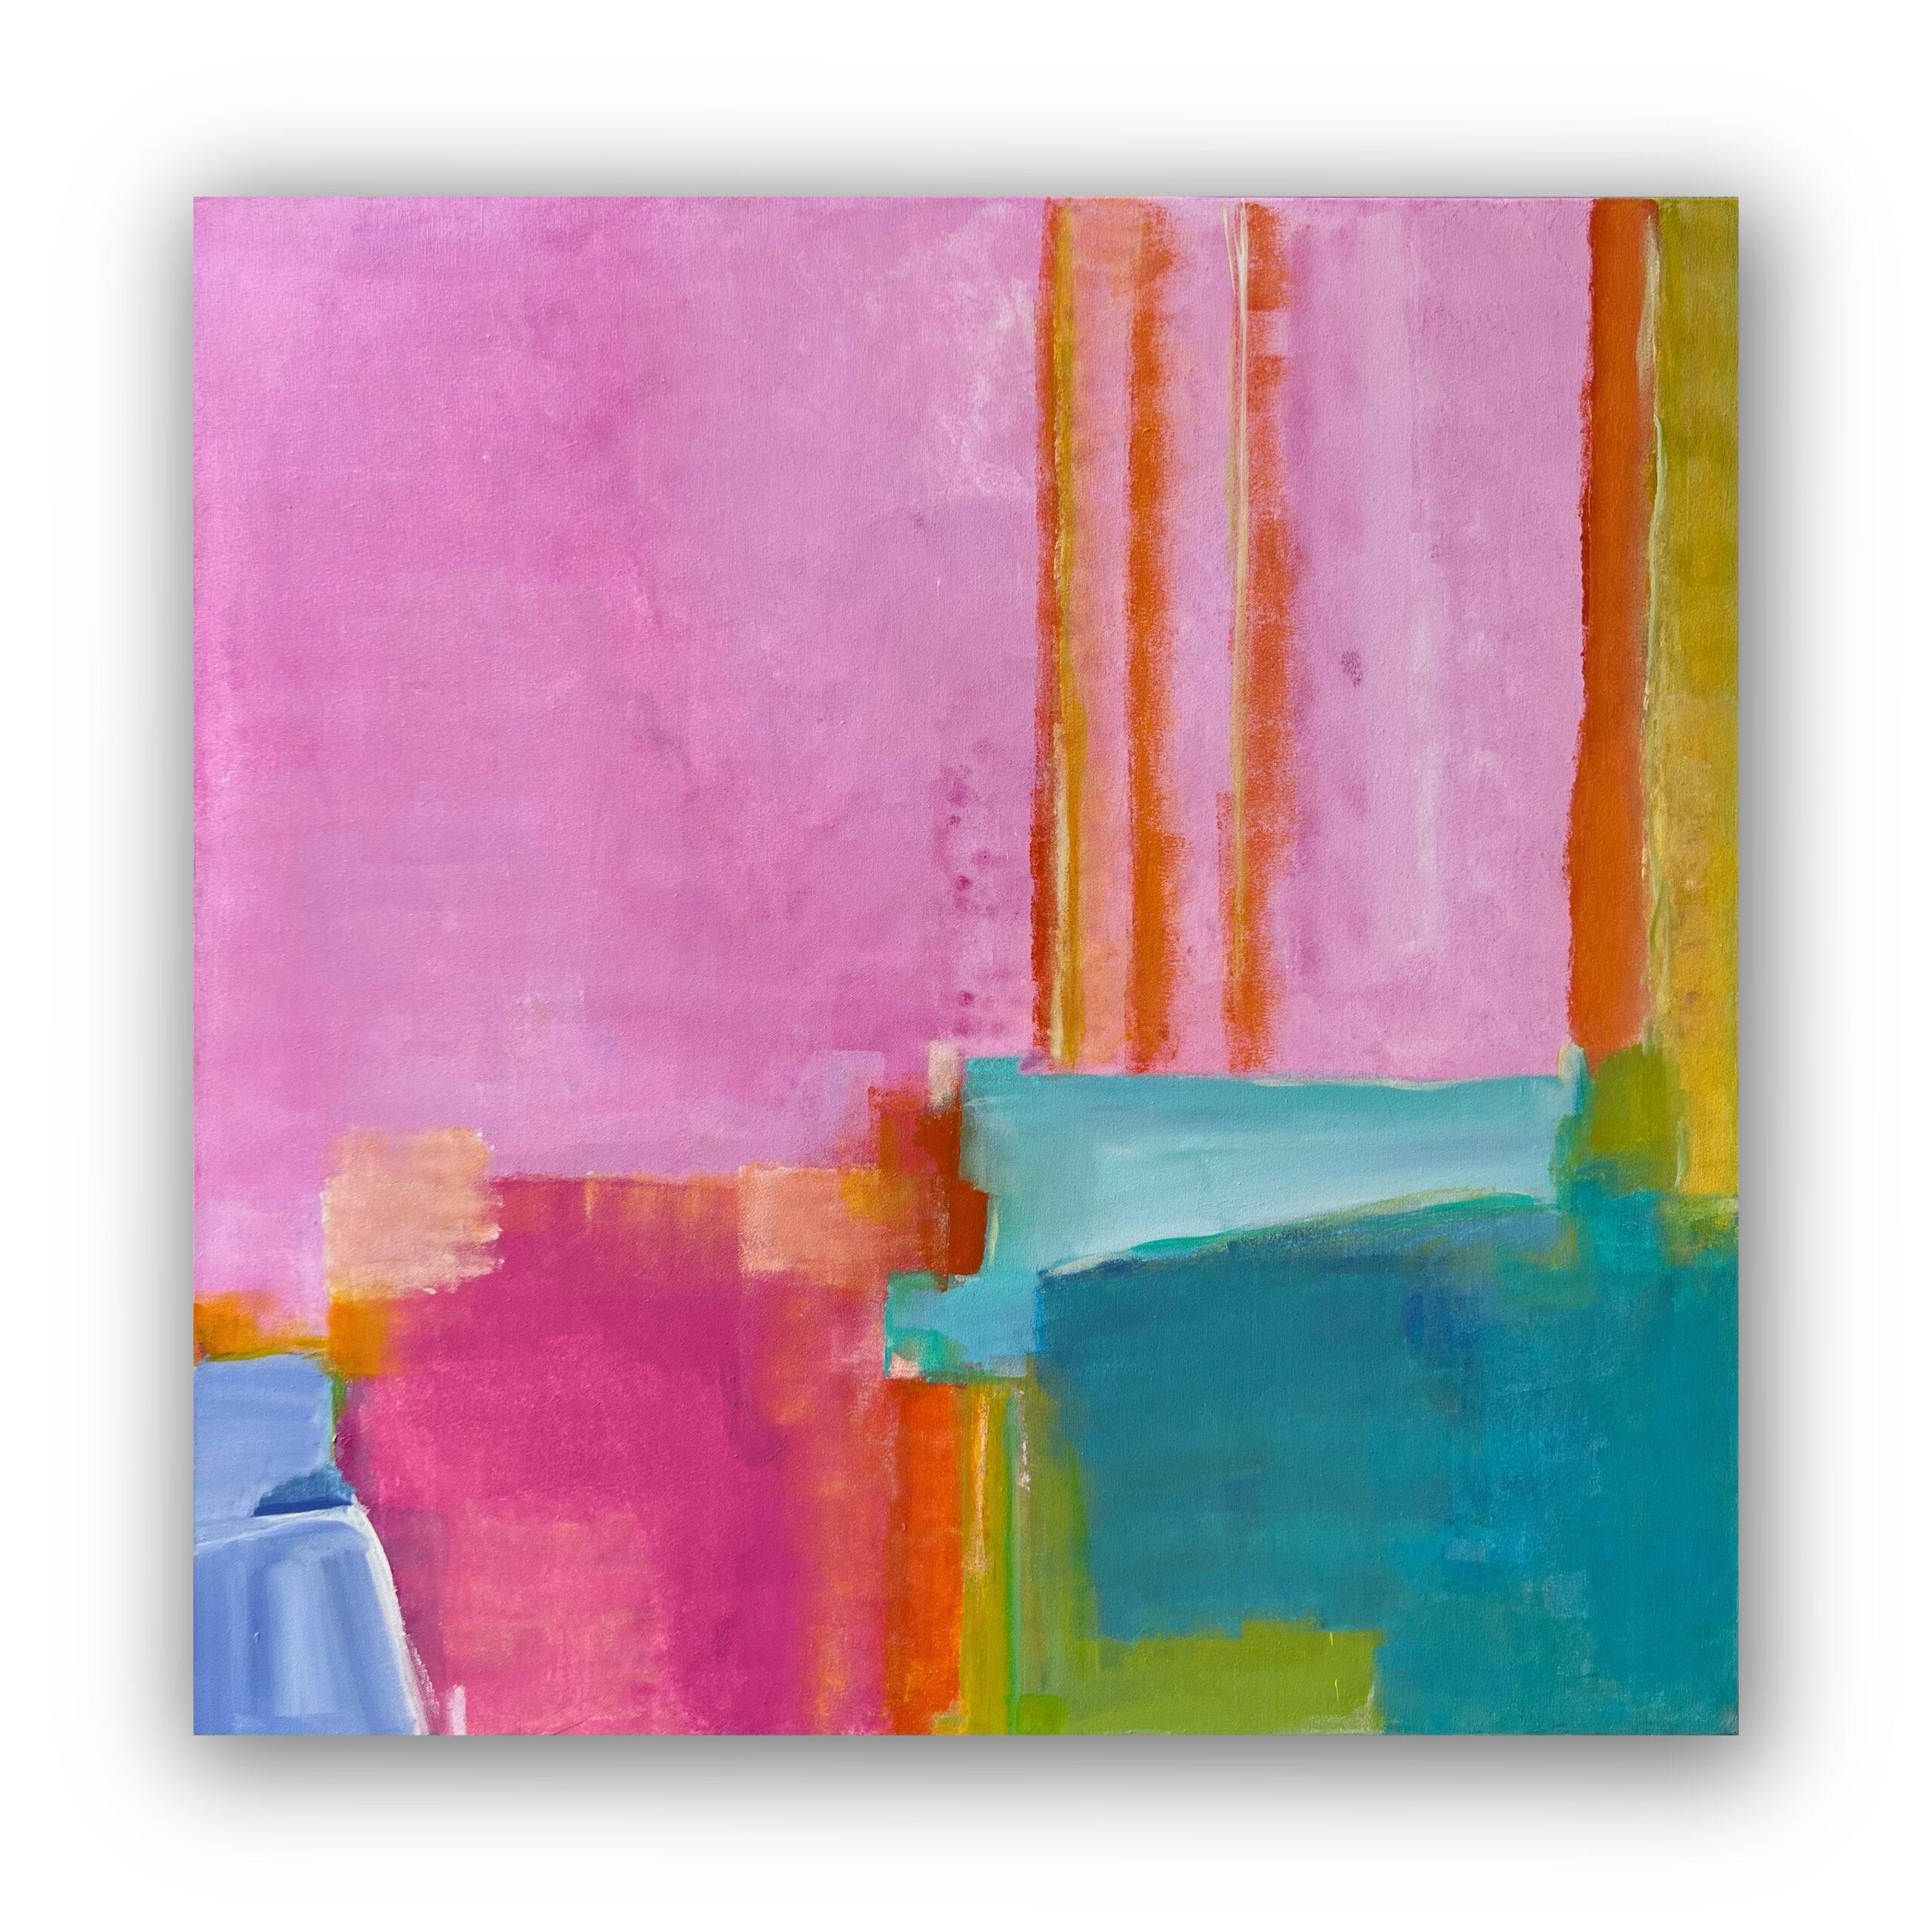 Kelley Carman
Pretty in Pink (Gestural Abstract, Pink, Orange, Yellow, Turquoise, Vibrant, Colorful)
Acrylic and Oil Stick
Year: 2023
Size: 36x36x1.5in
Signed
COA provided 
Ref.: 924802-2033

Tags: Abstract, pink, orange, yellow, turquoise  

